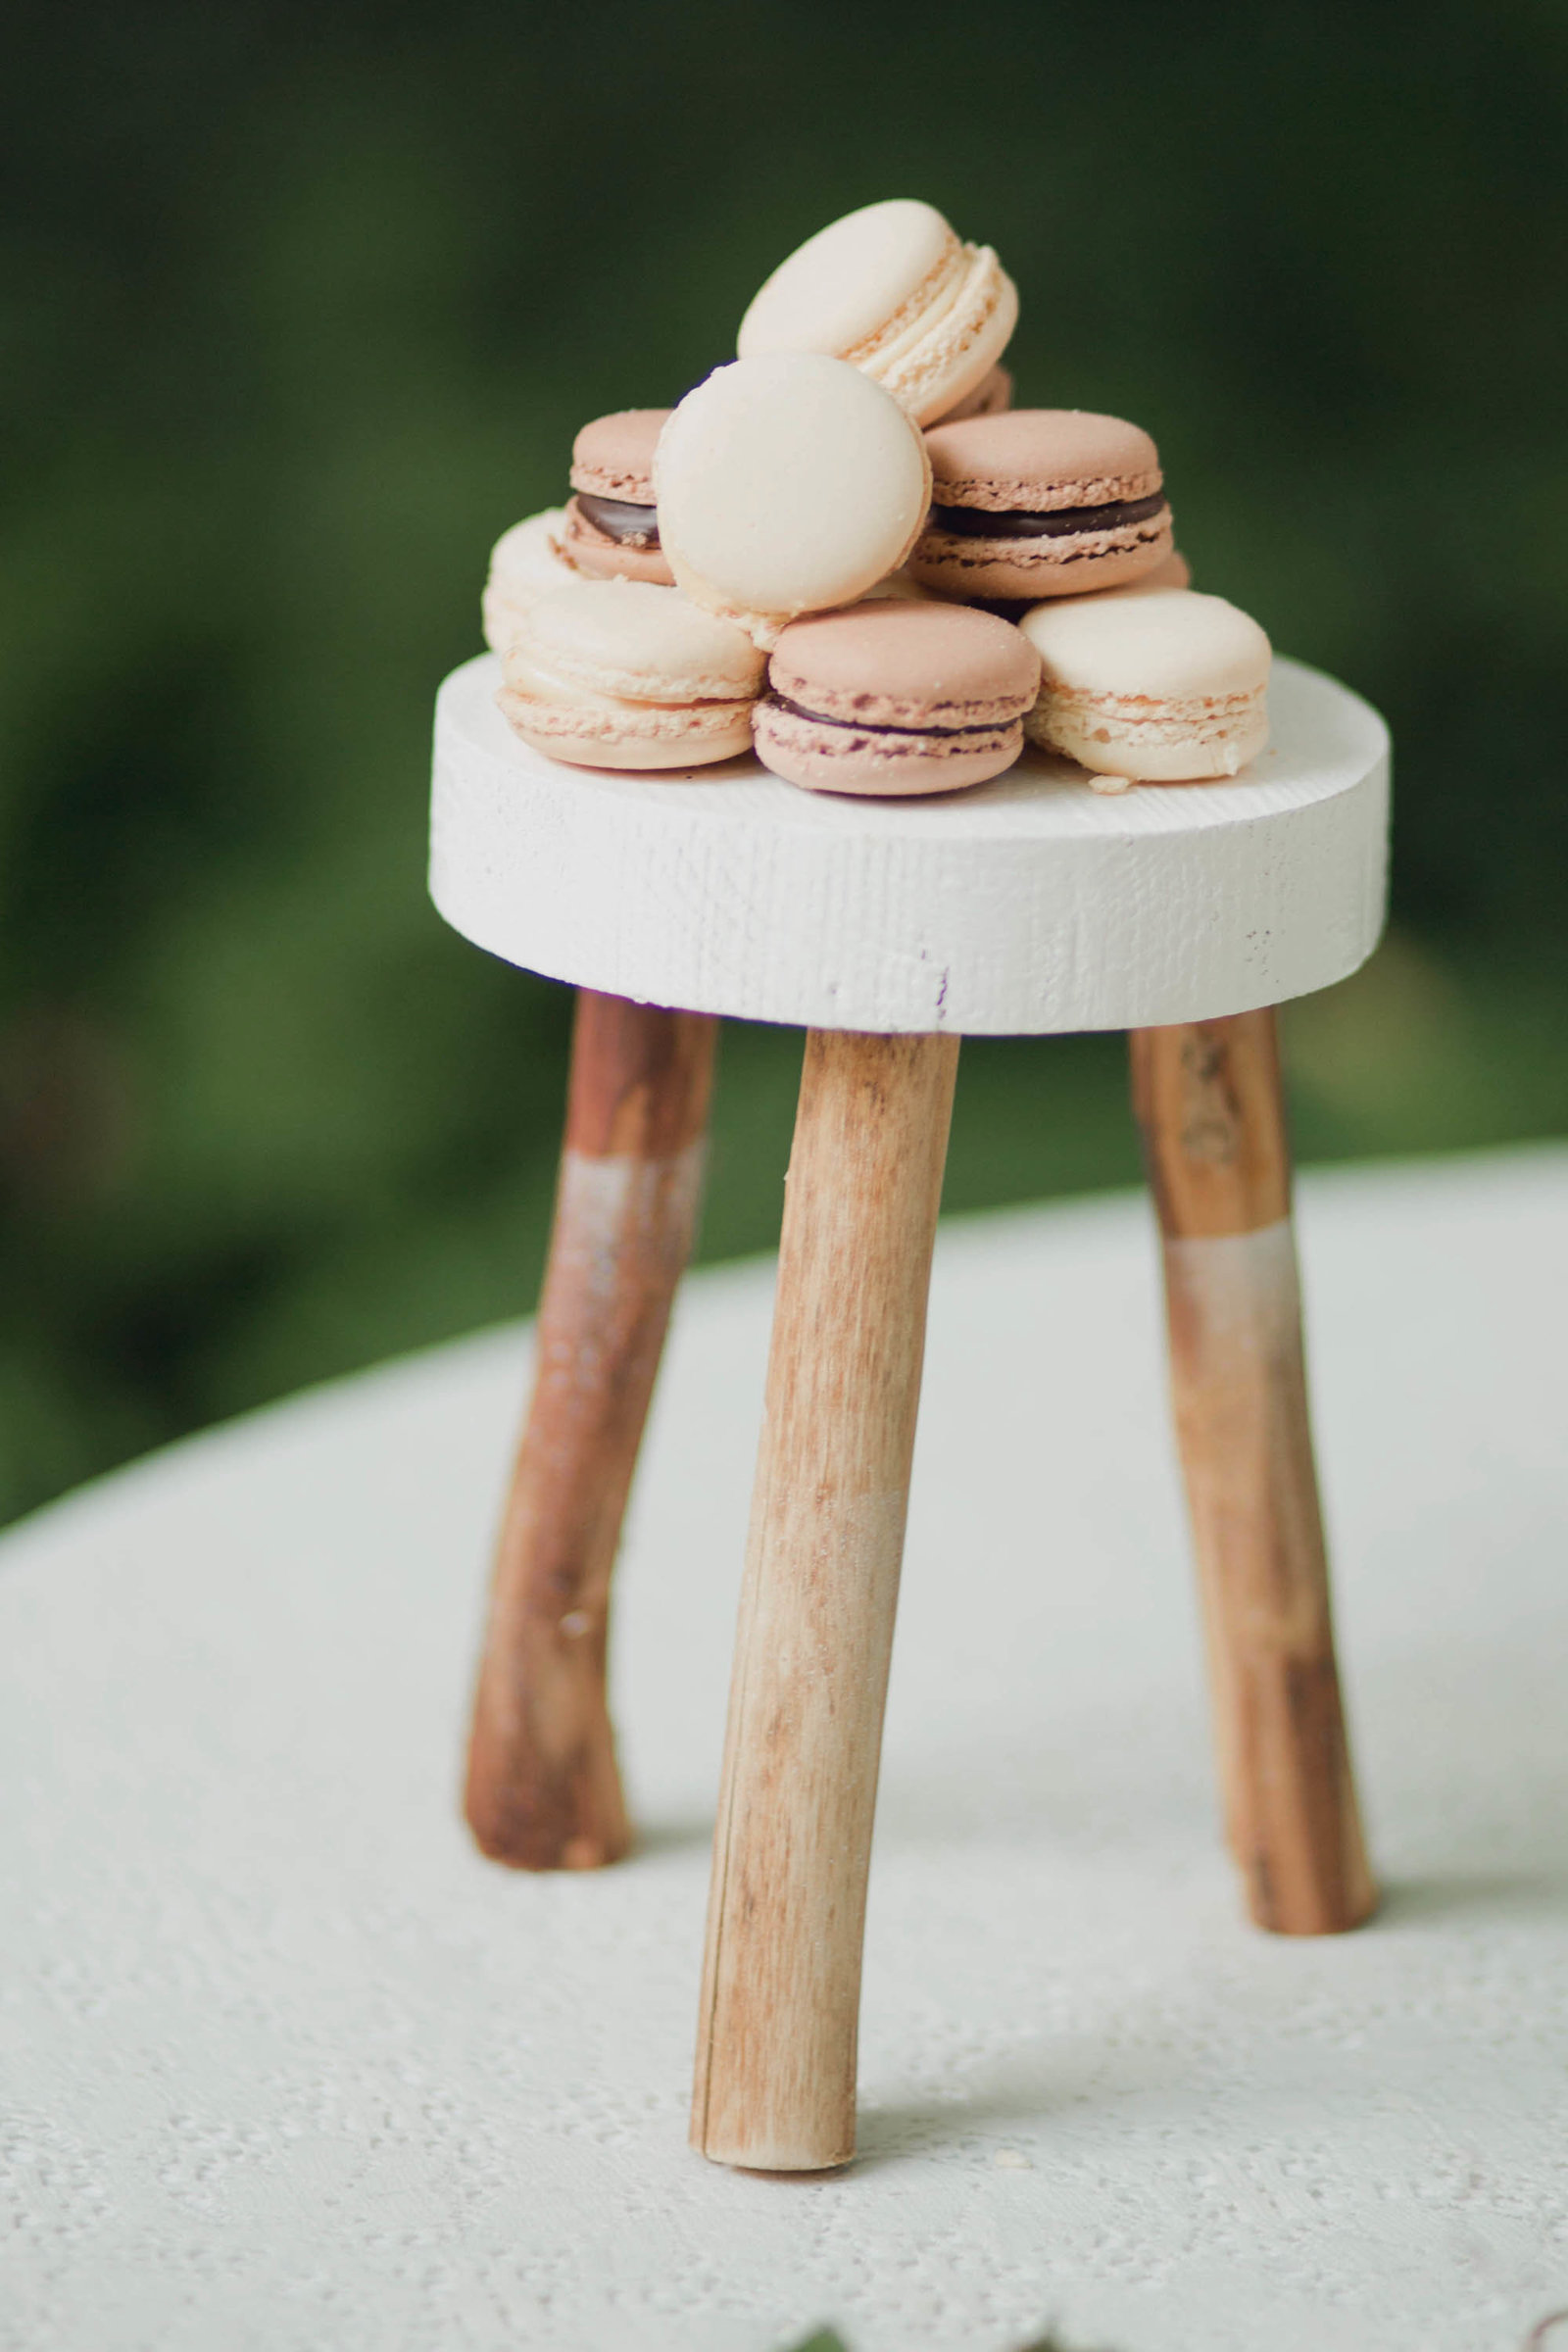 macaroon-renoir-farm-table-spring-bridal-lookbook-leann-marshall-editorial-wedding-chicks-published-old-mill-media-photography-papertree-studio-kate-timbers322